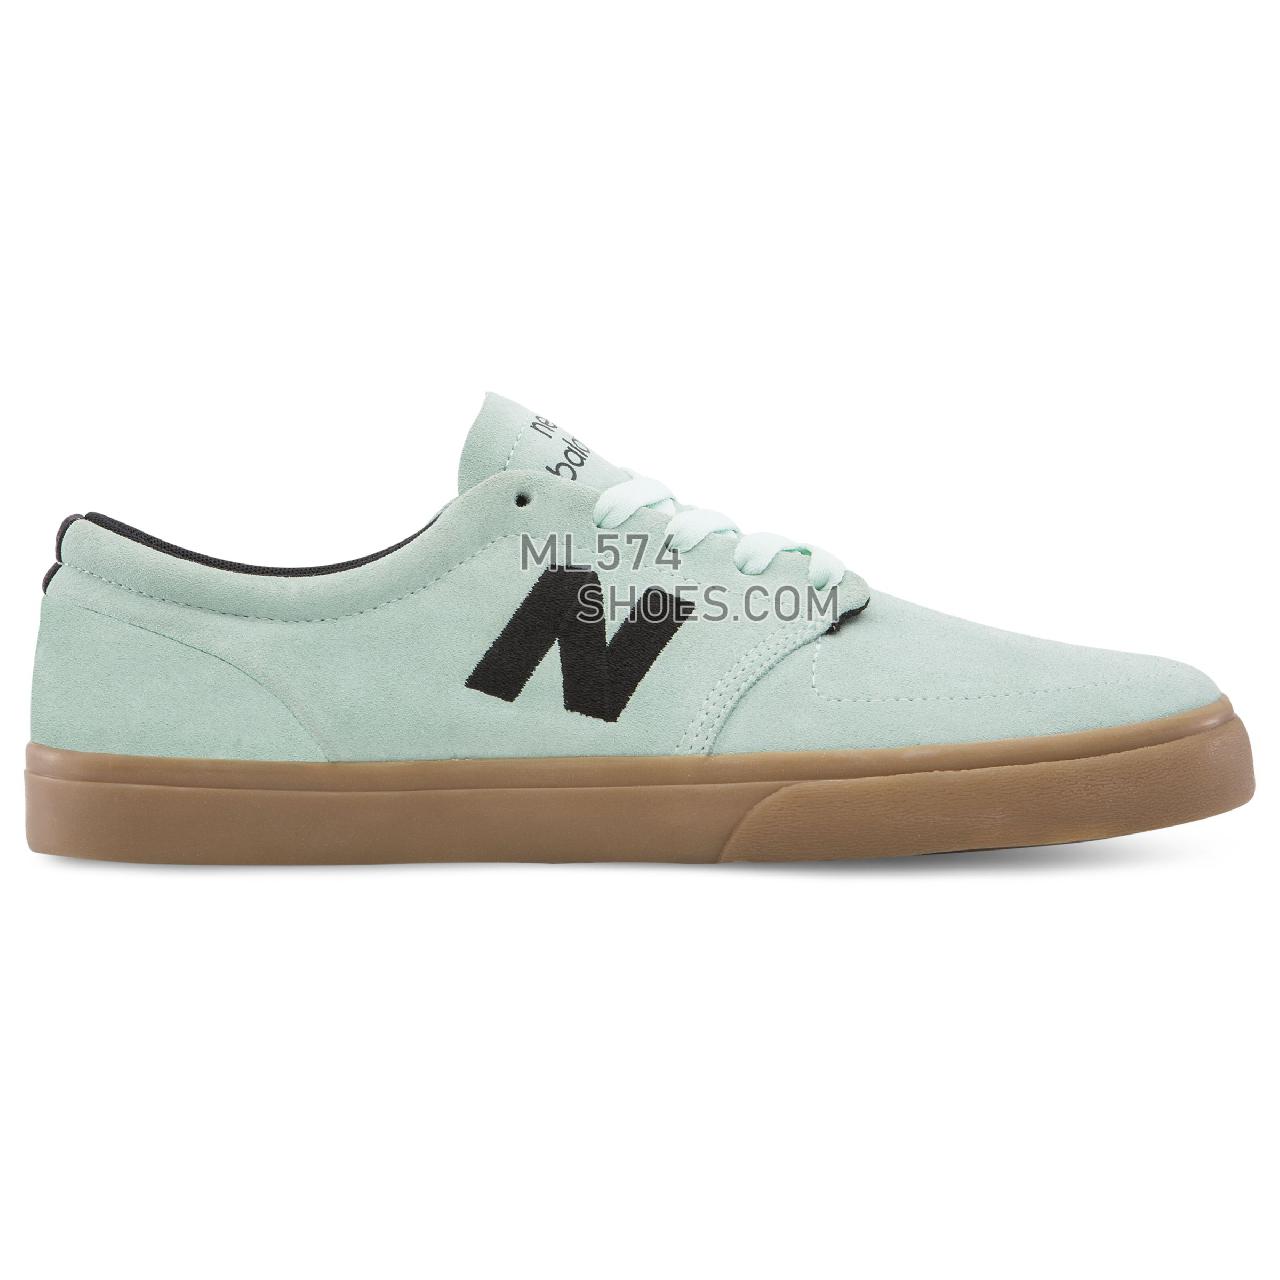 New Balance 345 - Men's 345 - Classic Mint with Black - NM345MNG